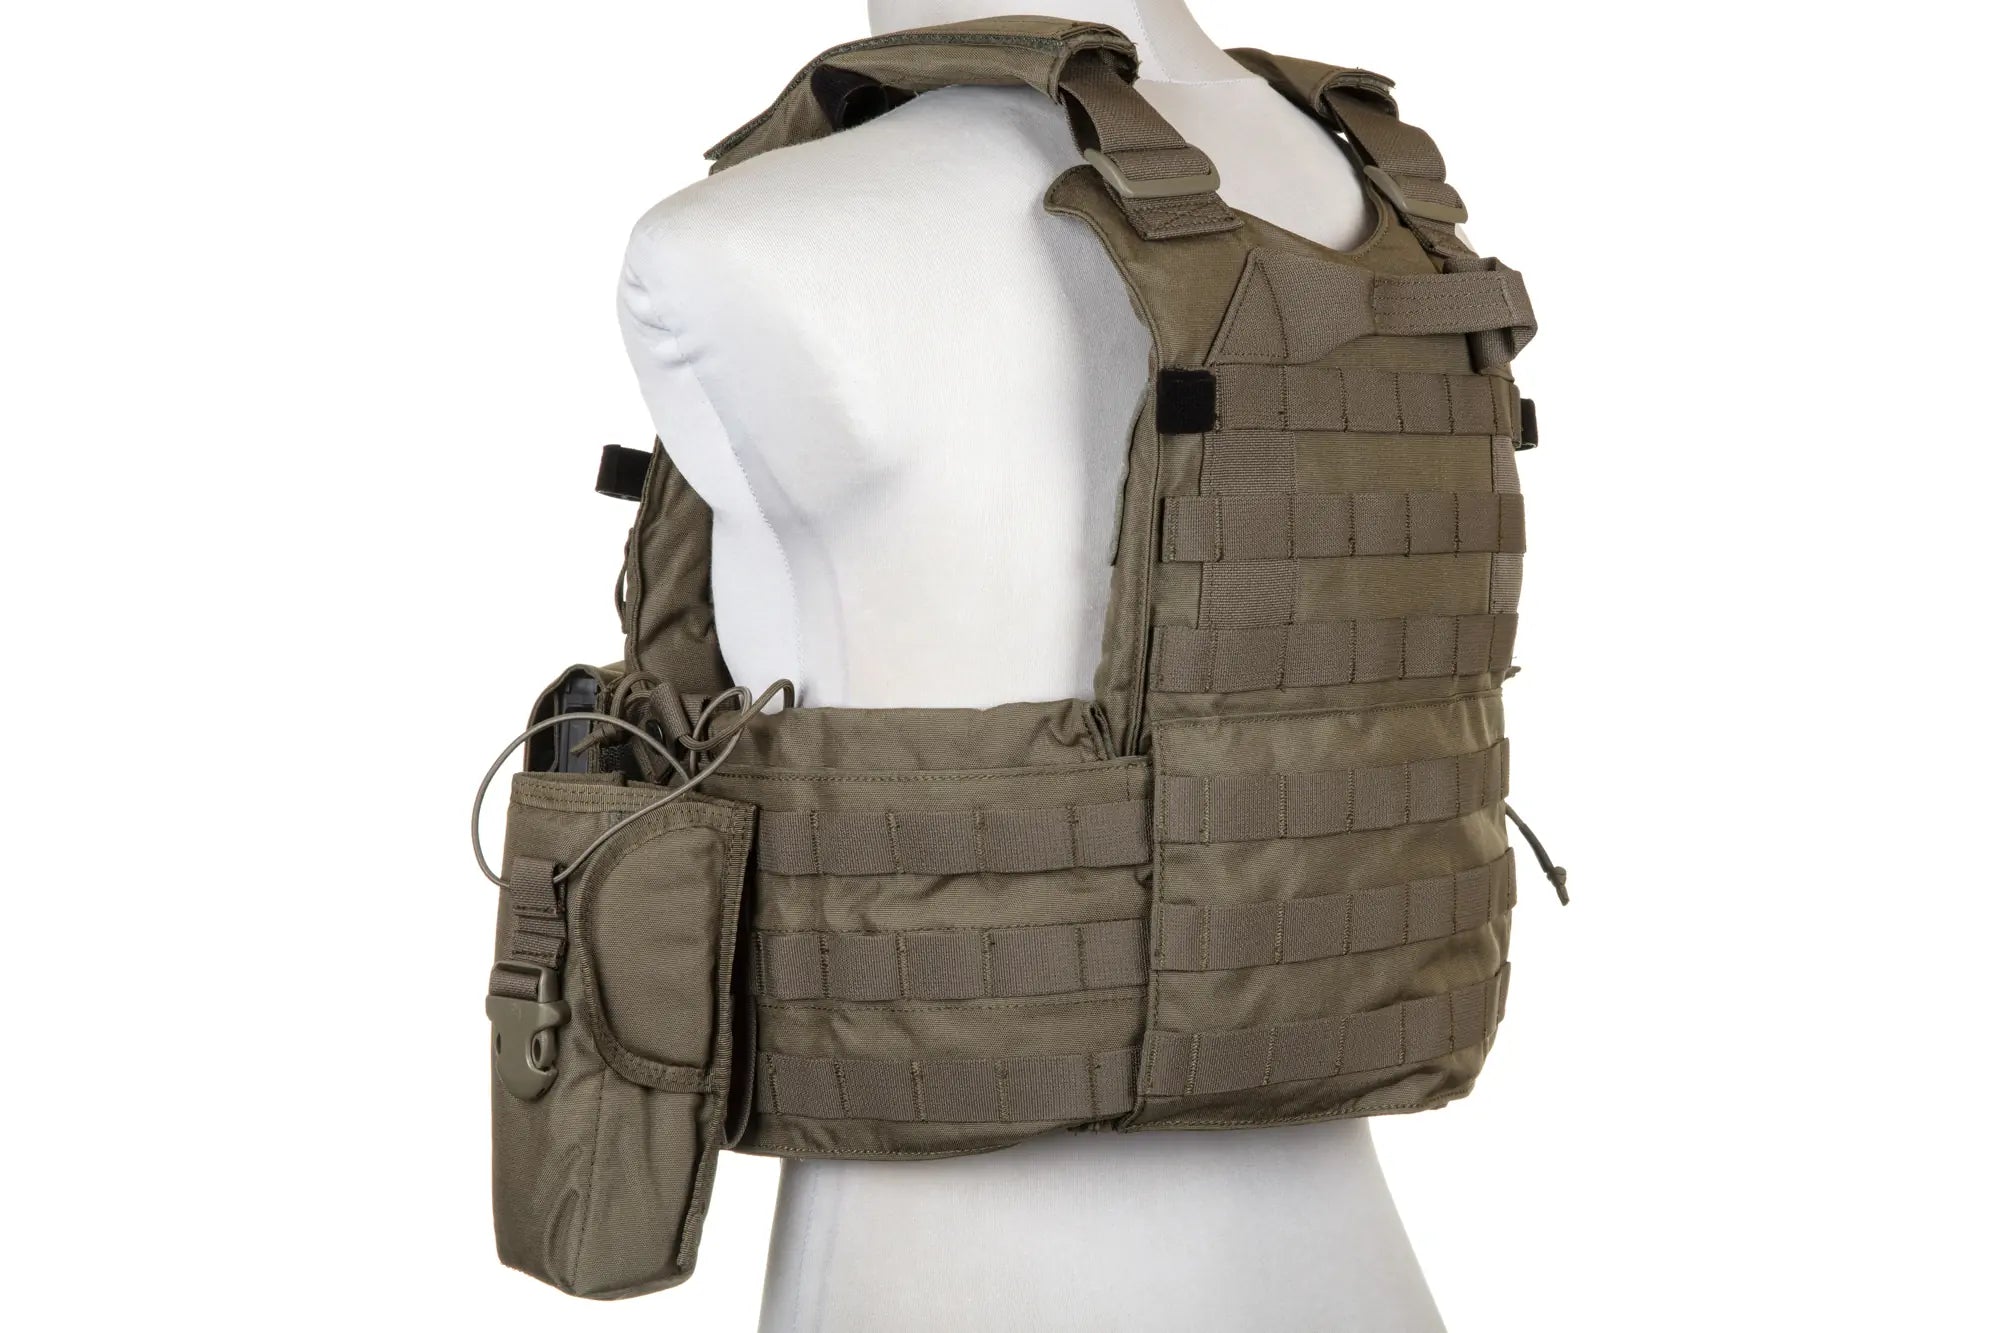 Emerson Gear 6094A Style Plate Carrier waistcoat with Ranger Green cargo kit-2